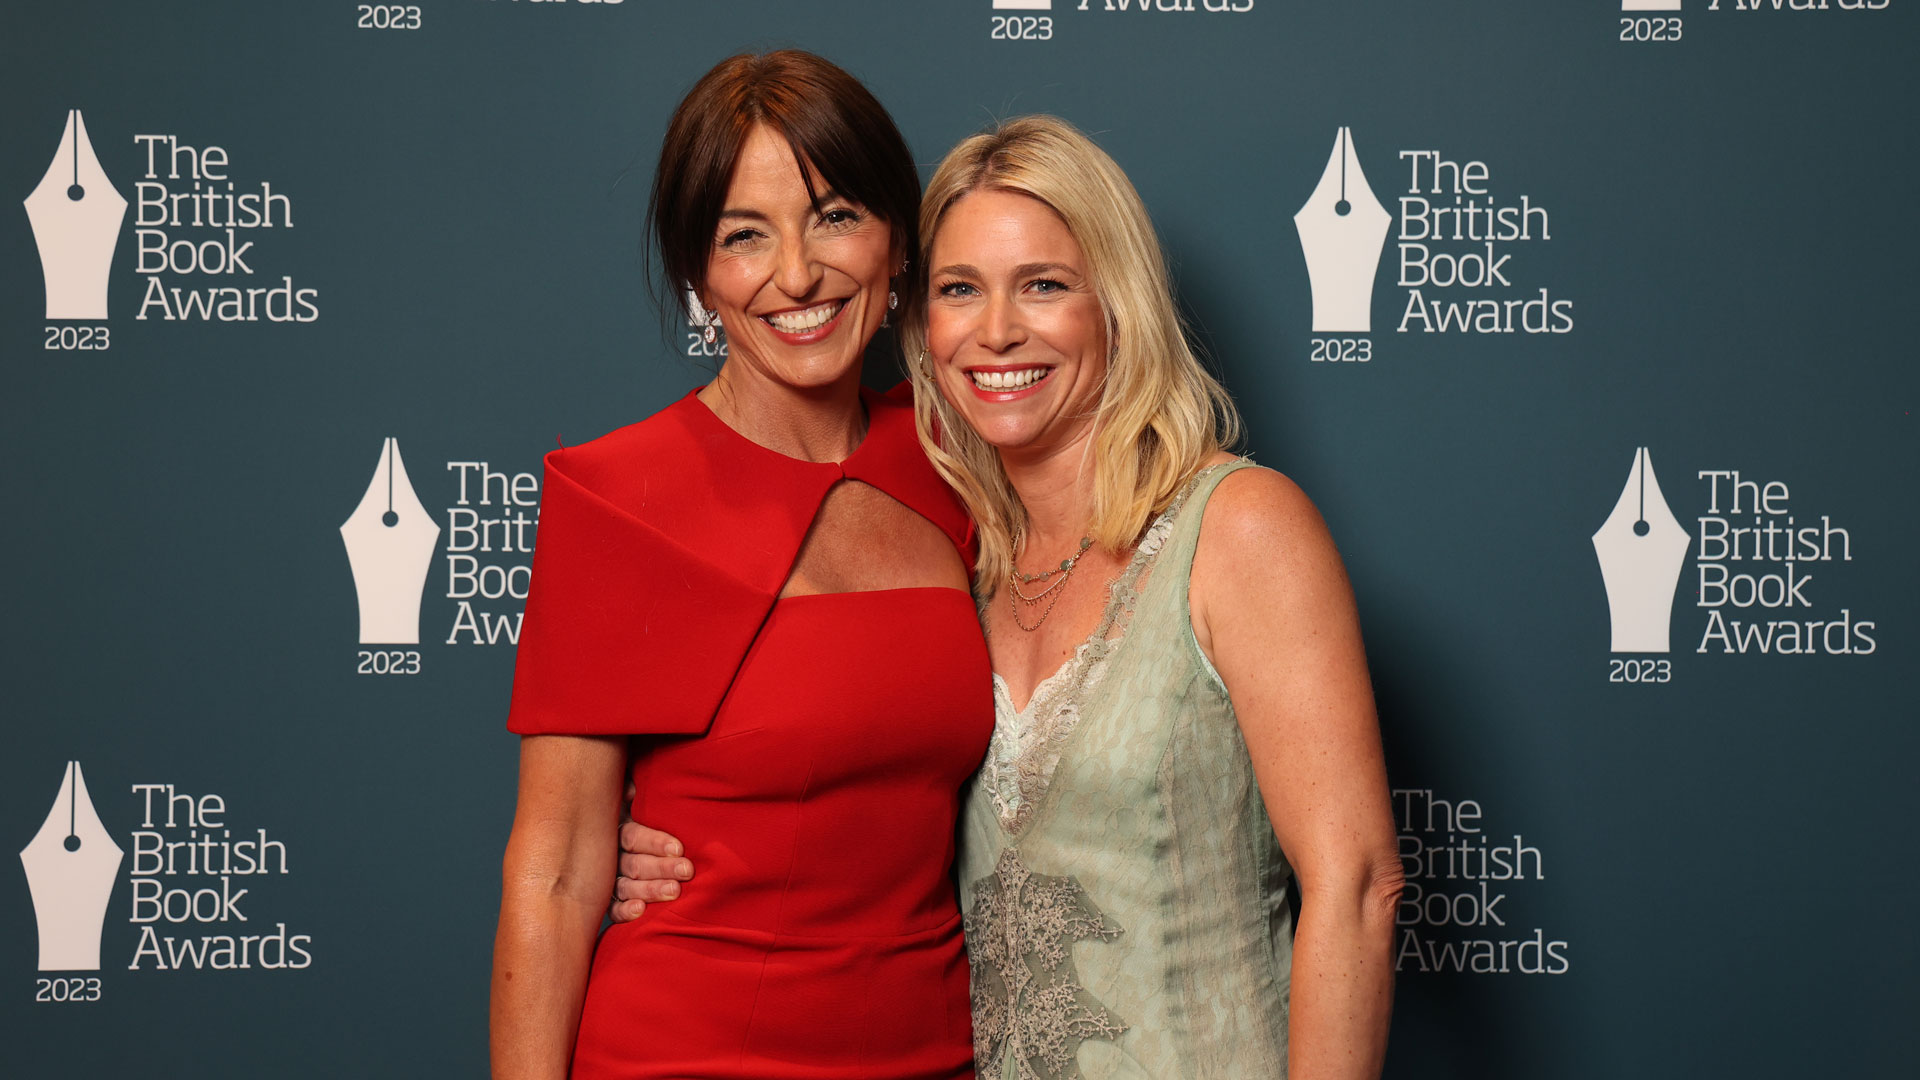 Davina McCall with co -author Dr Naomi Potter win Book of the Year at The British Book Awards 2023 ceremony, at JW Marriott Grosvenor House London.